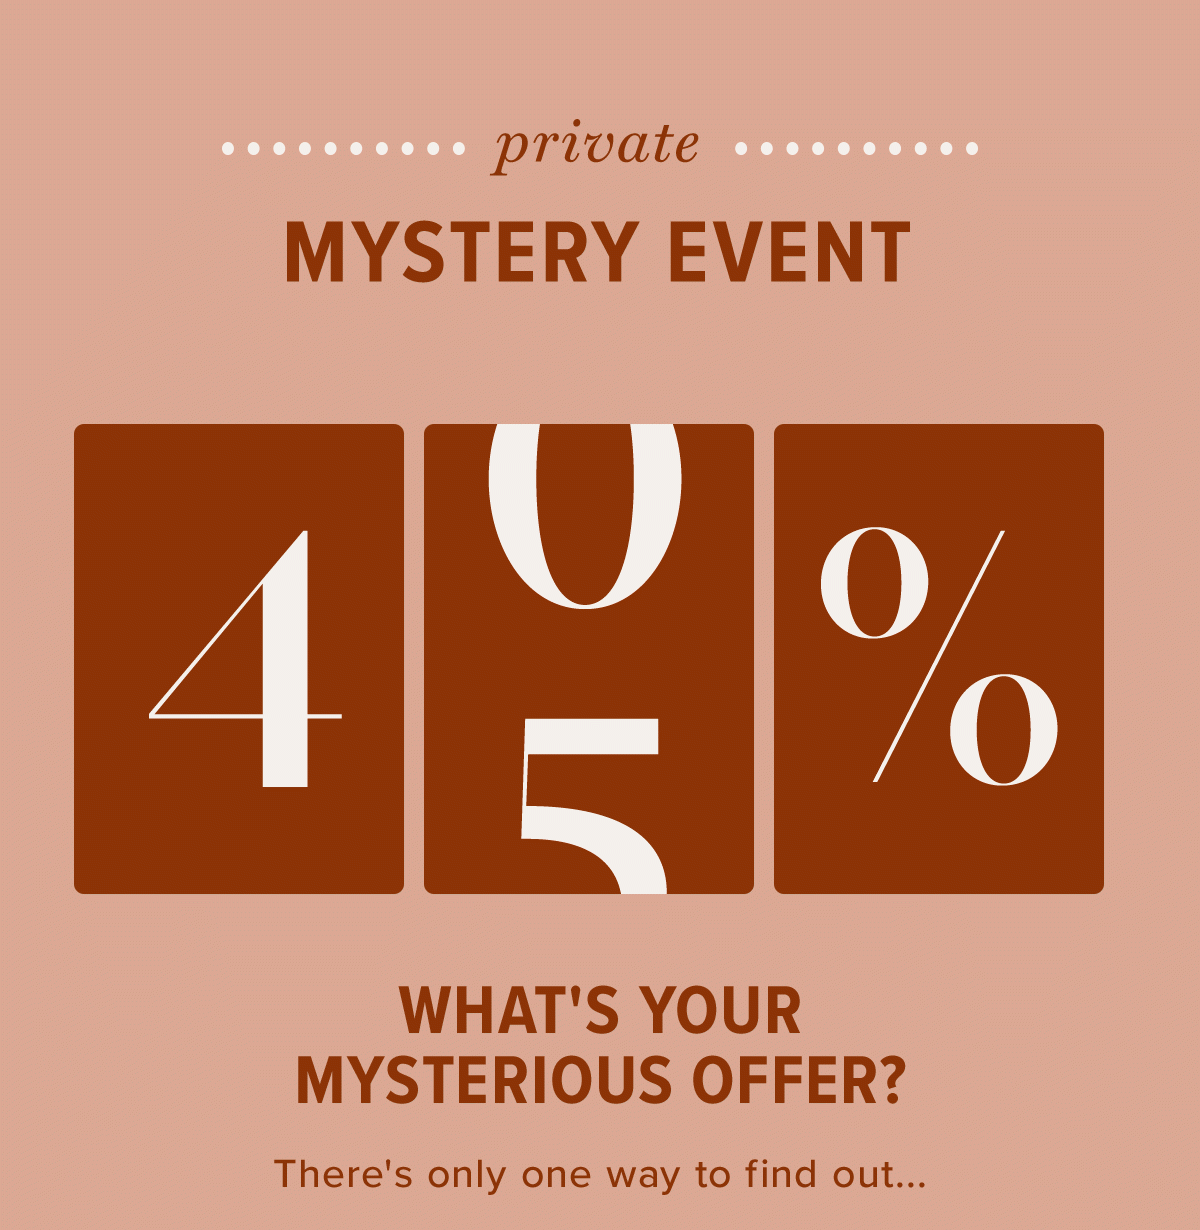 What's your Mysterious Offer?*